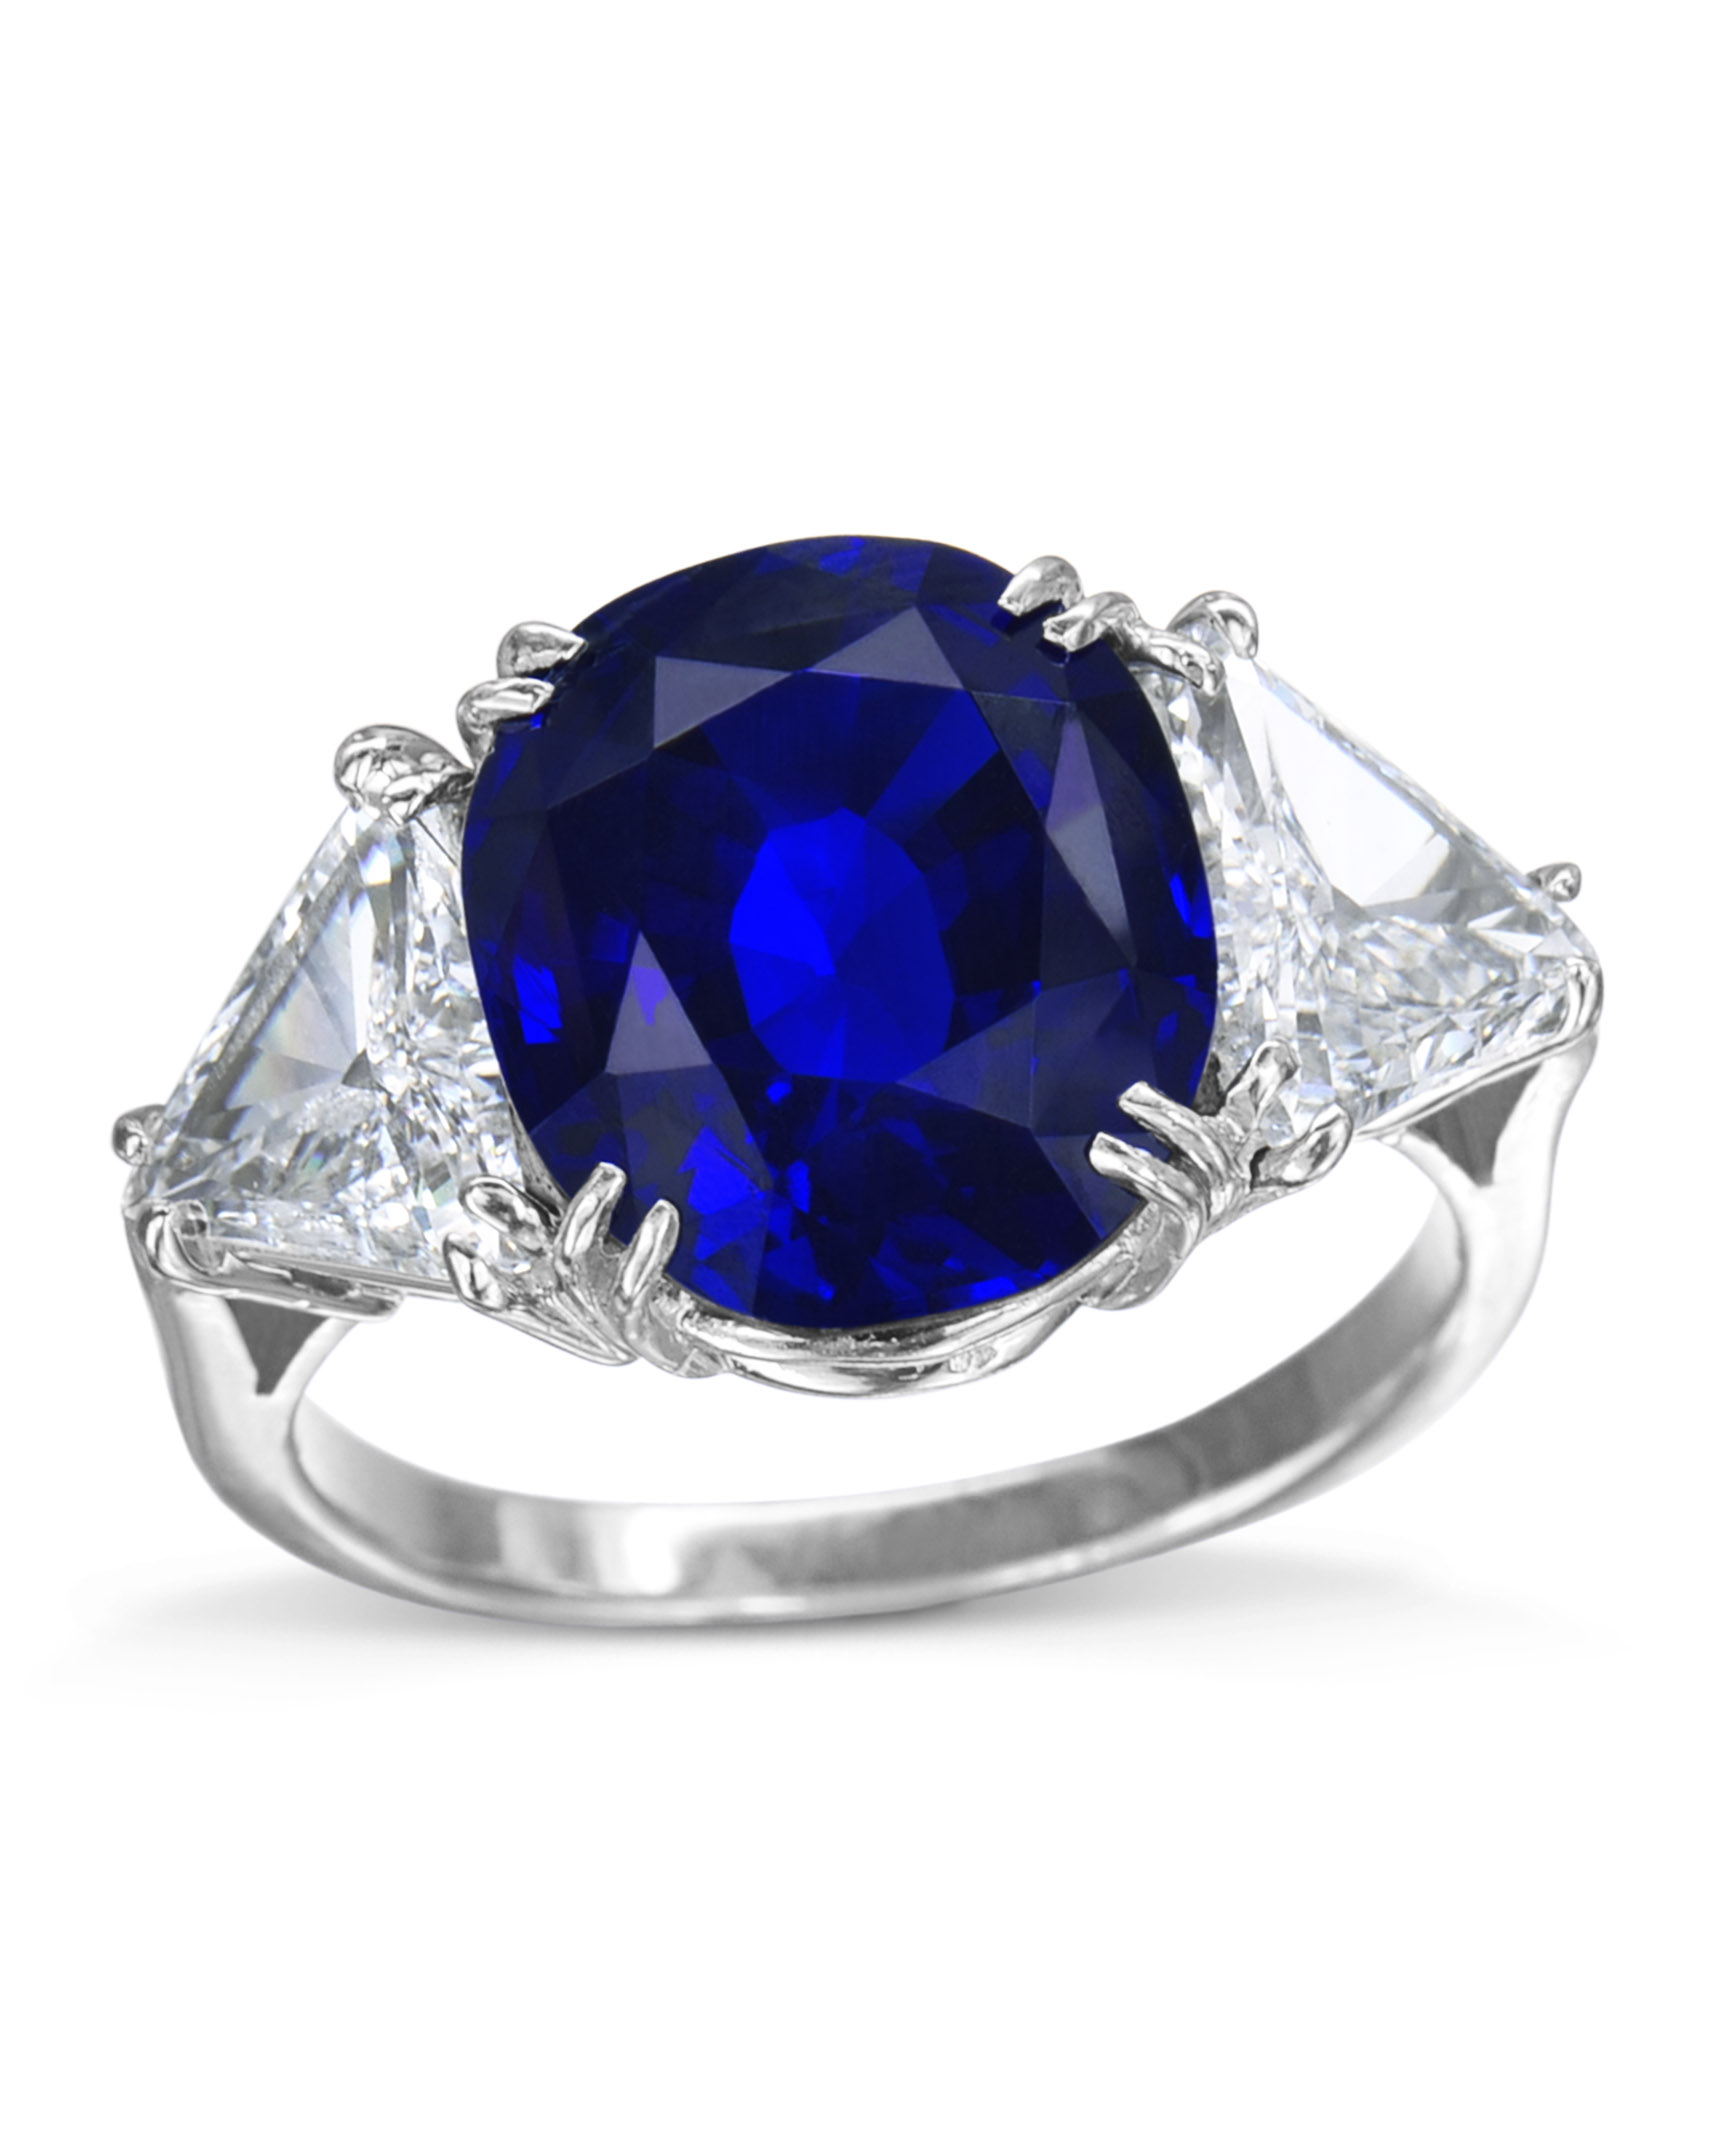 Royal Blue Radiant Cut Sapphire and Diamond Ring. - Etsy